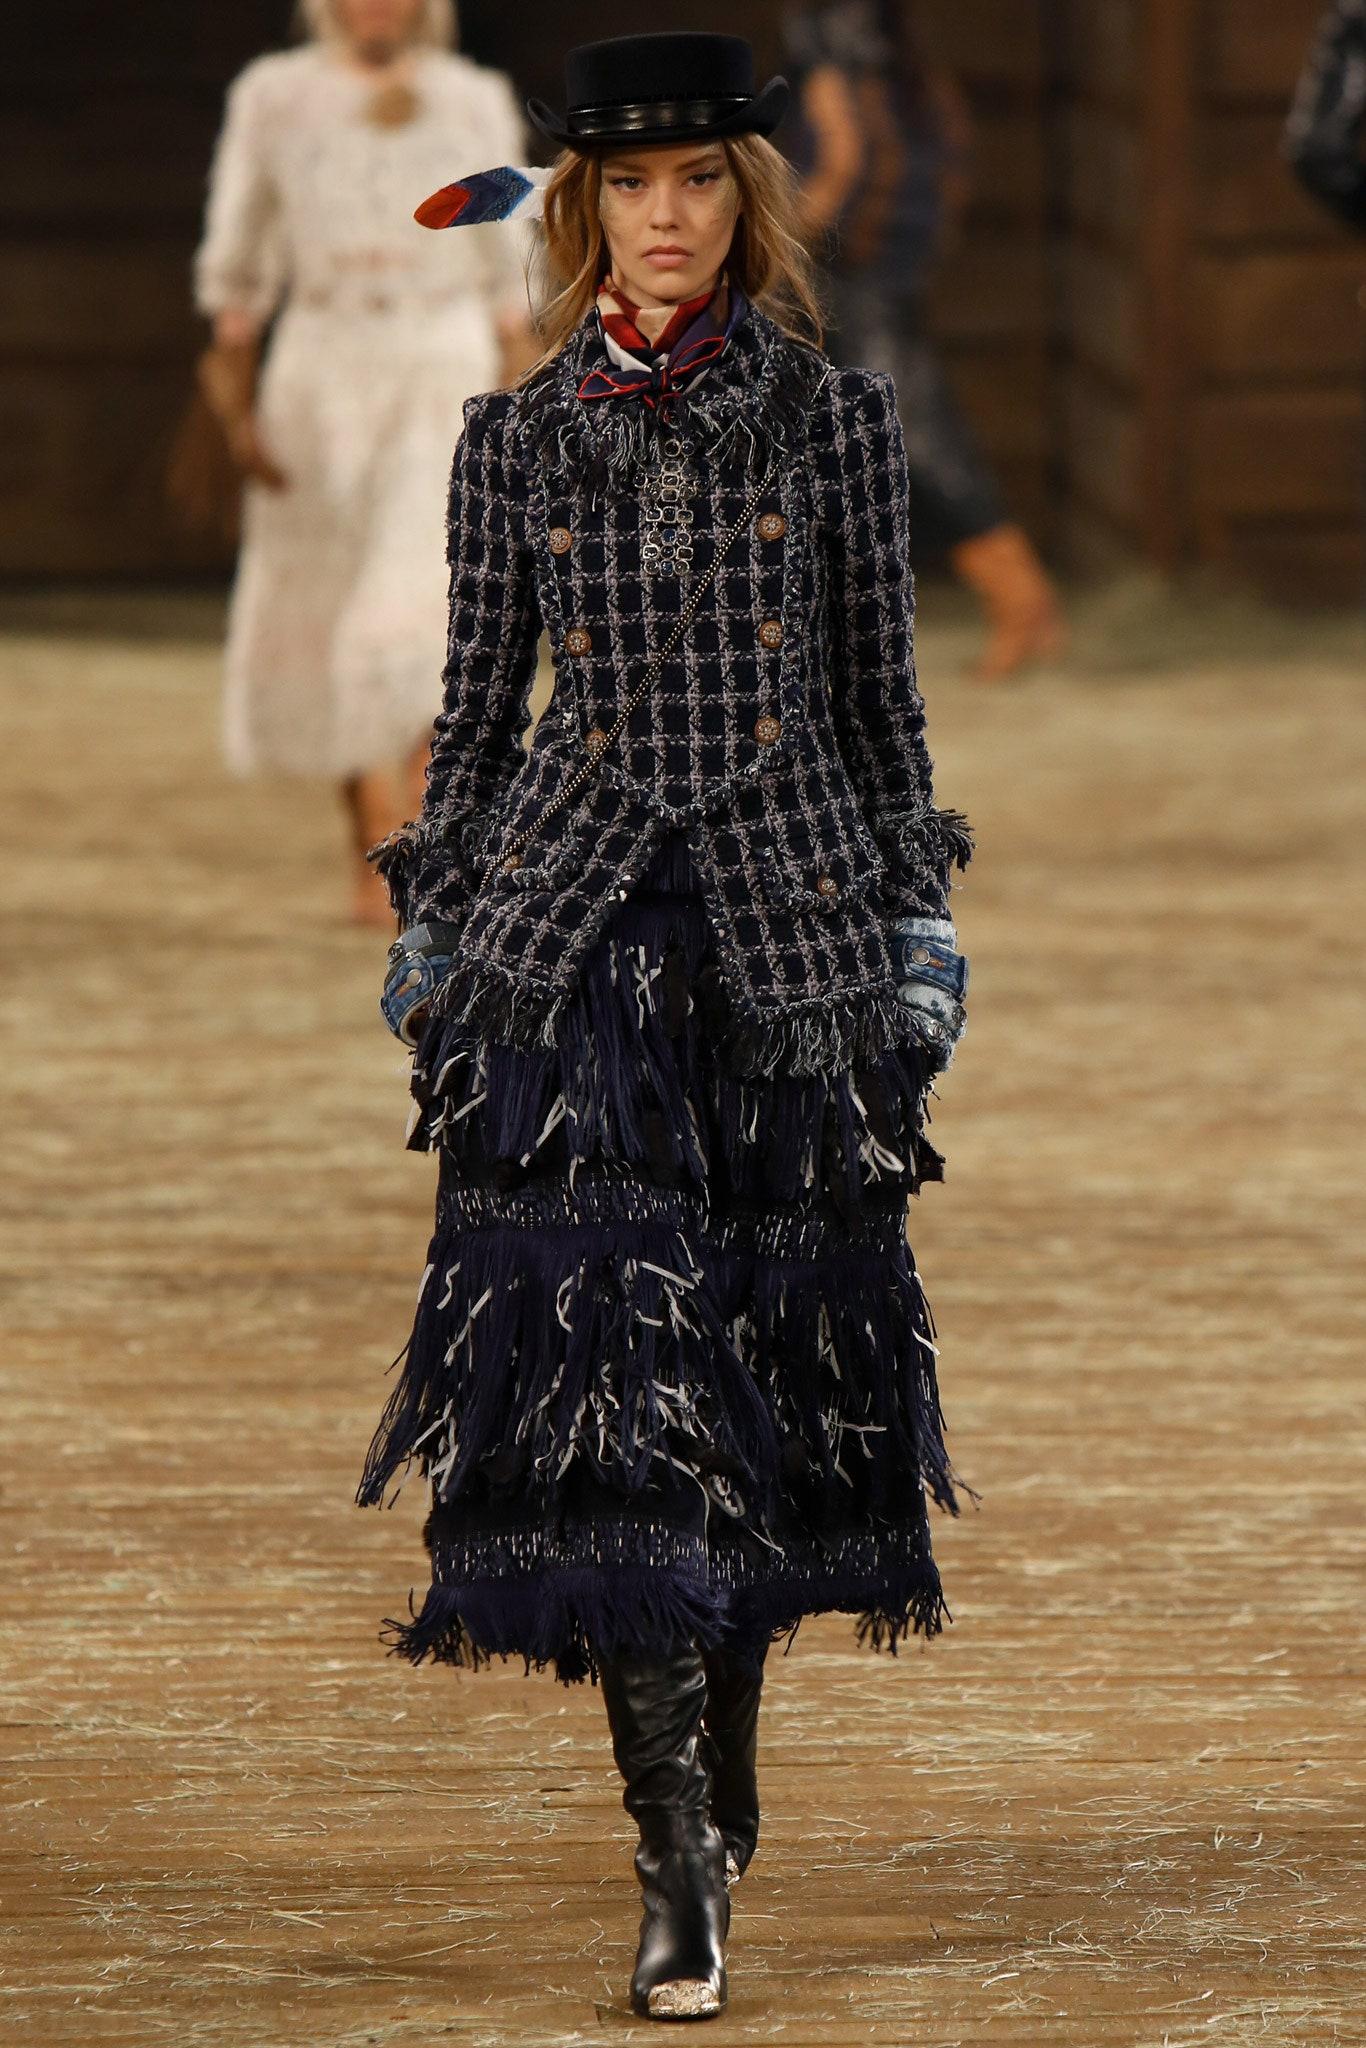 Super rare Chanel navy tweed jacket with fringe detail from Runway of Paris / DALLAS Collection, 2014 Pre-Fall Metiers d'Art
Size mark 40 FR. Never worn! Retail price over 10,000$
Price on e-bay 6,999$ for a pre-owned item.
- CC zip front closure
-